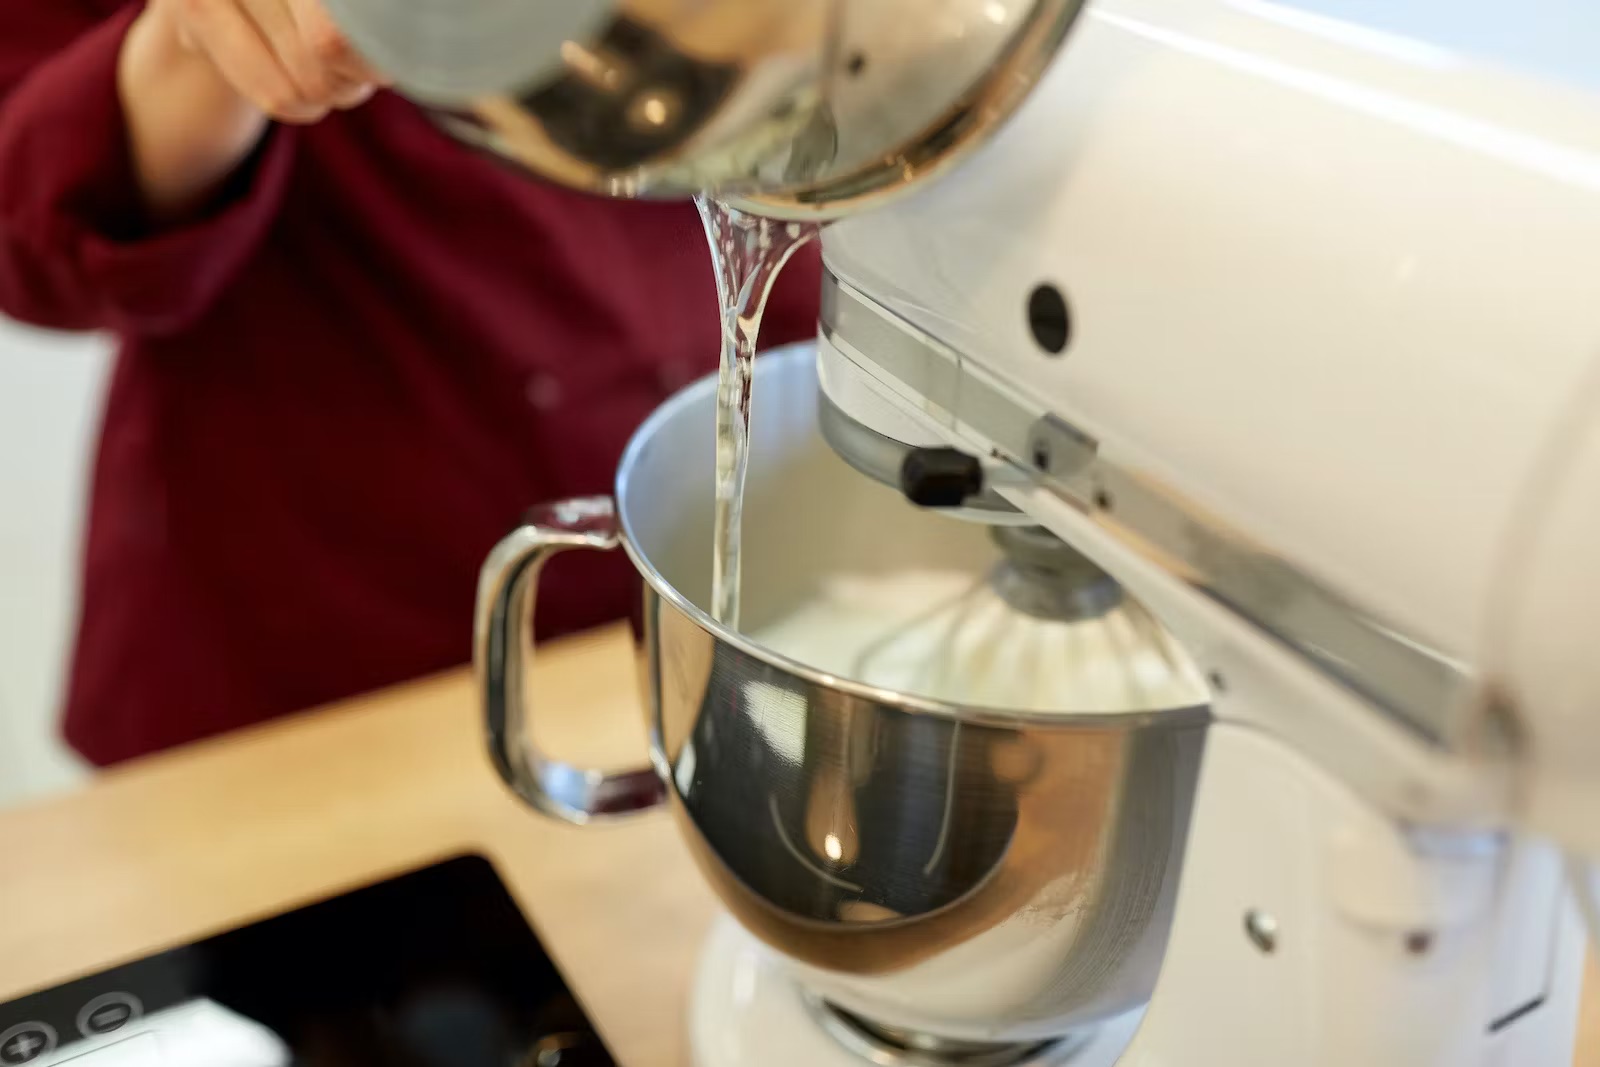 Stand Mixer - Hacks Guide Information